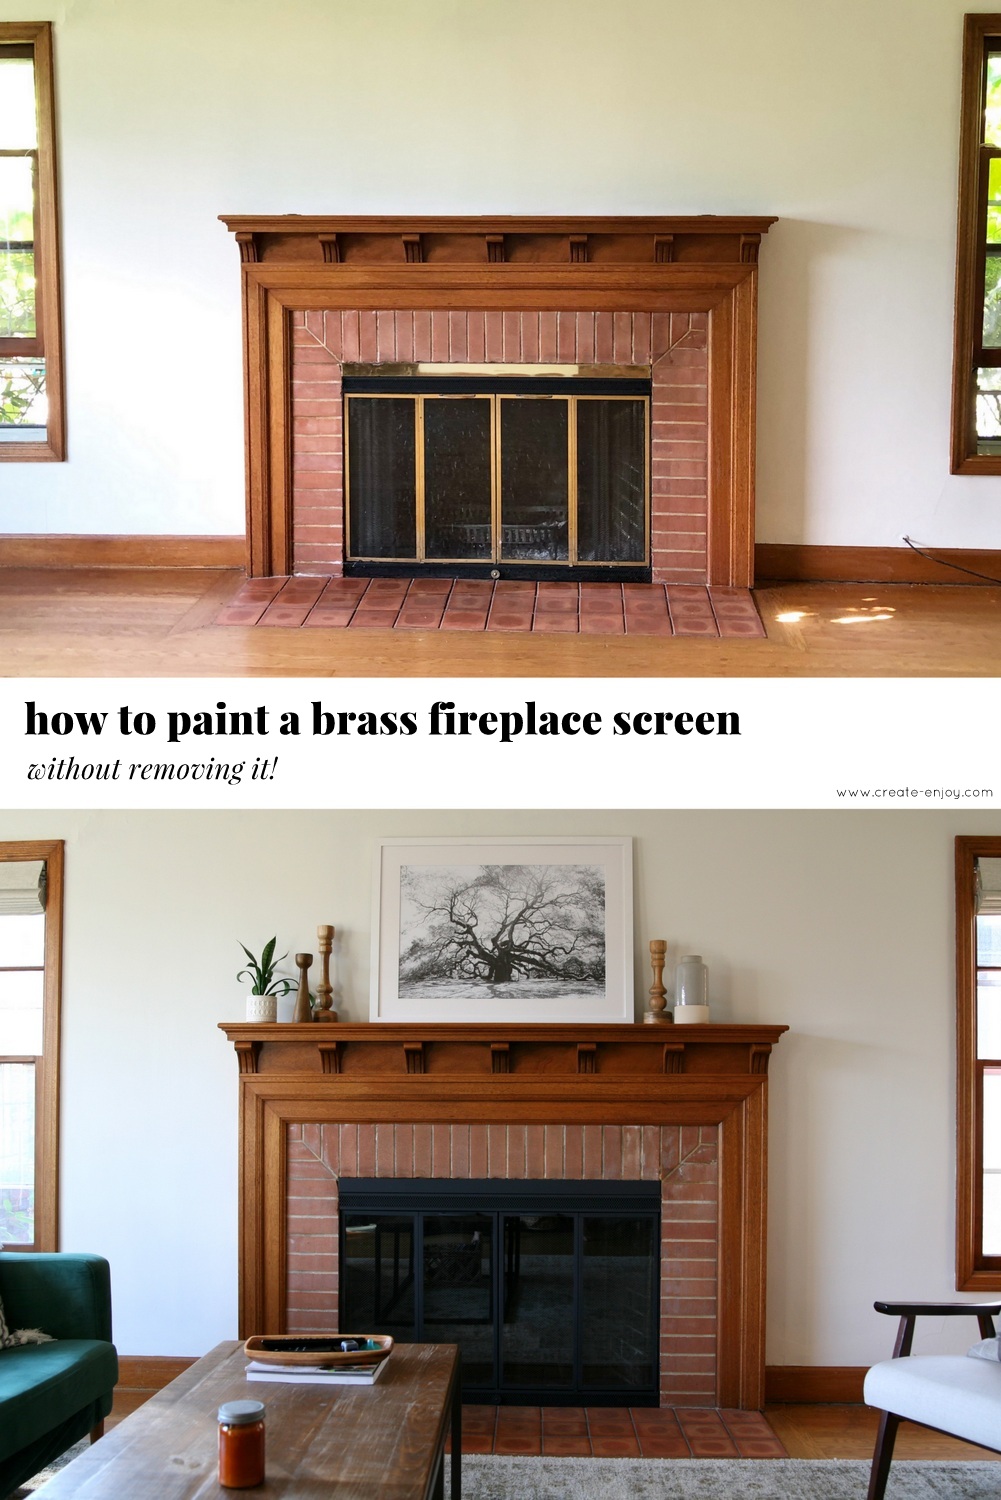 How To Paint A Brass Fireplace Screen, How To Fix Fireplace Screen Curtain